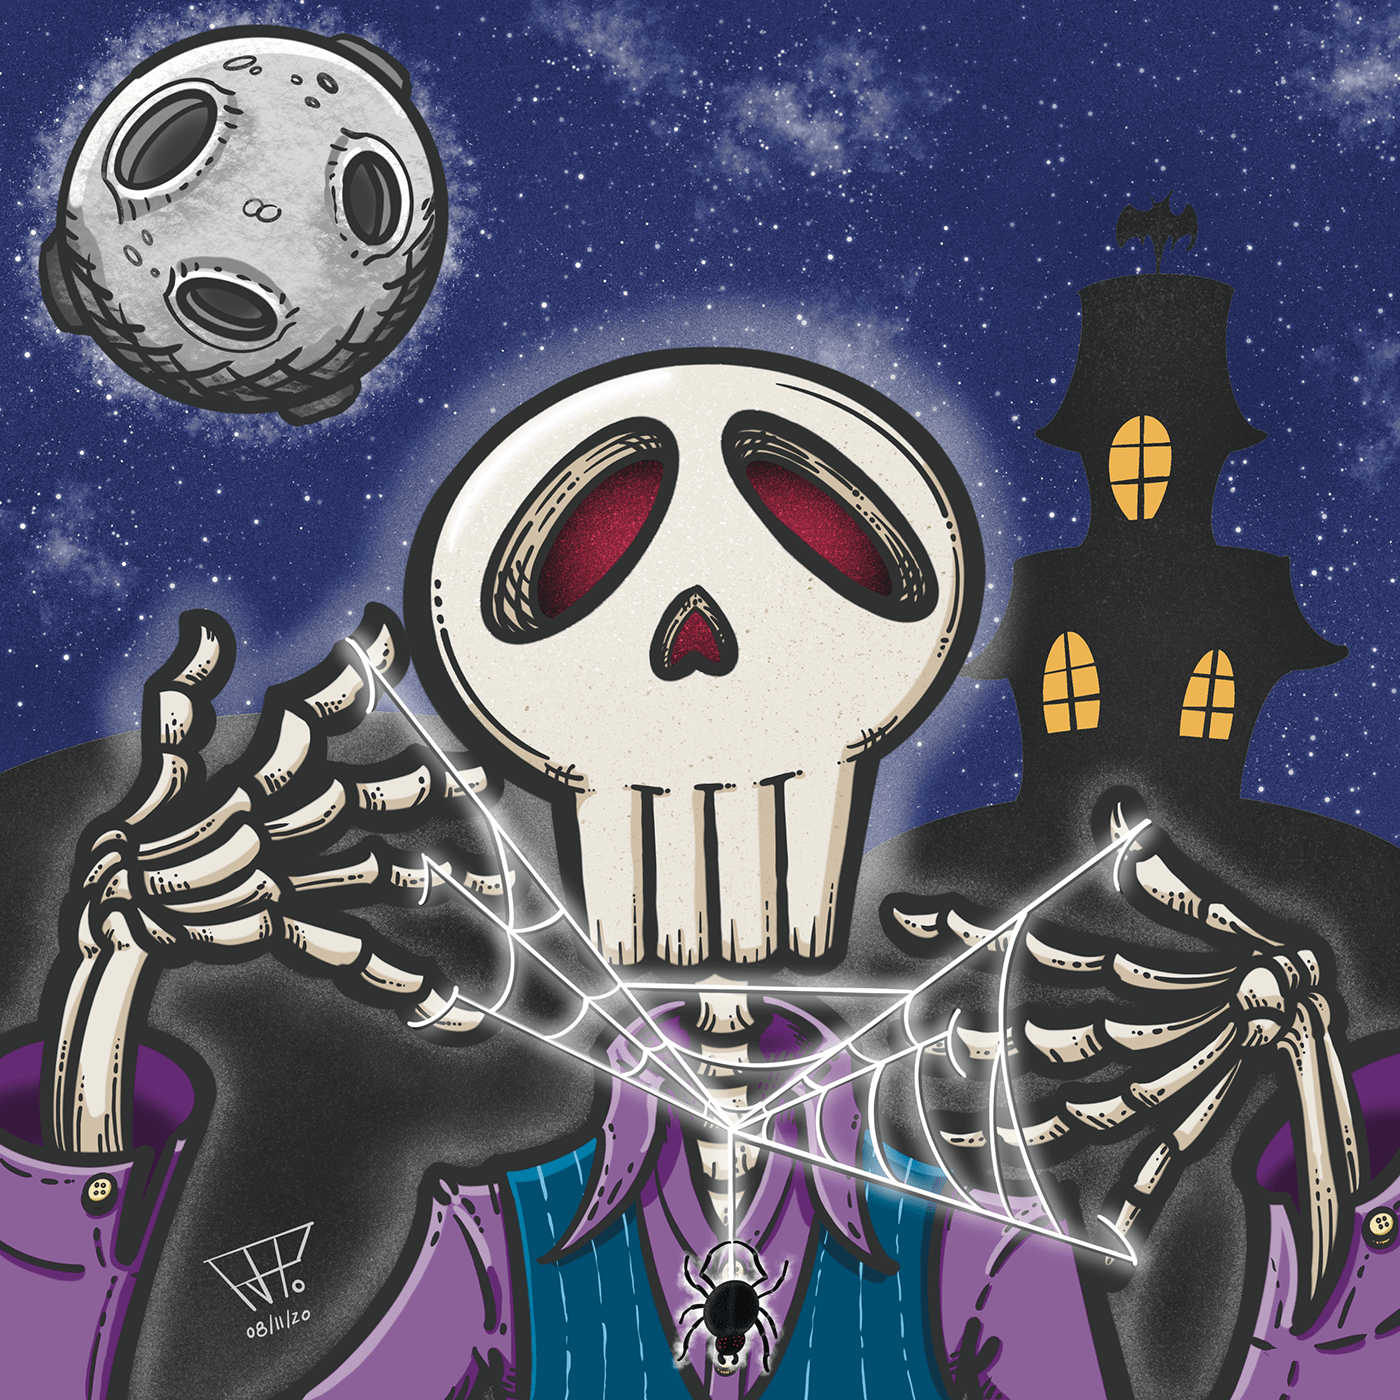 Andy Mc Skully play with his spider under the light of a full moon in a halloween night.